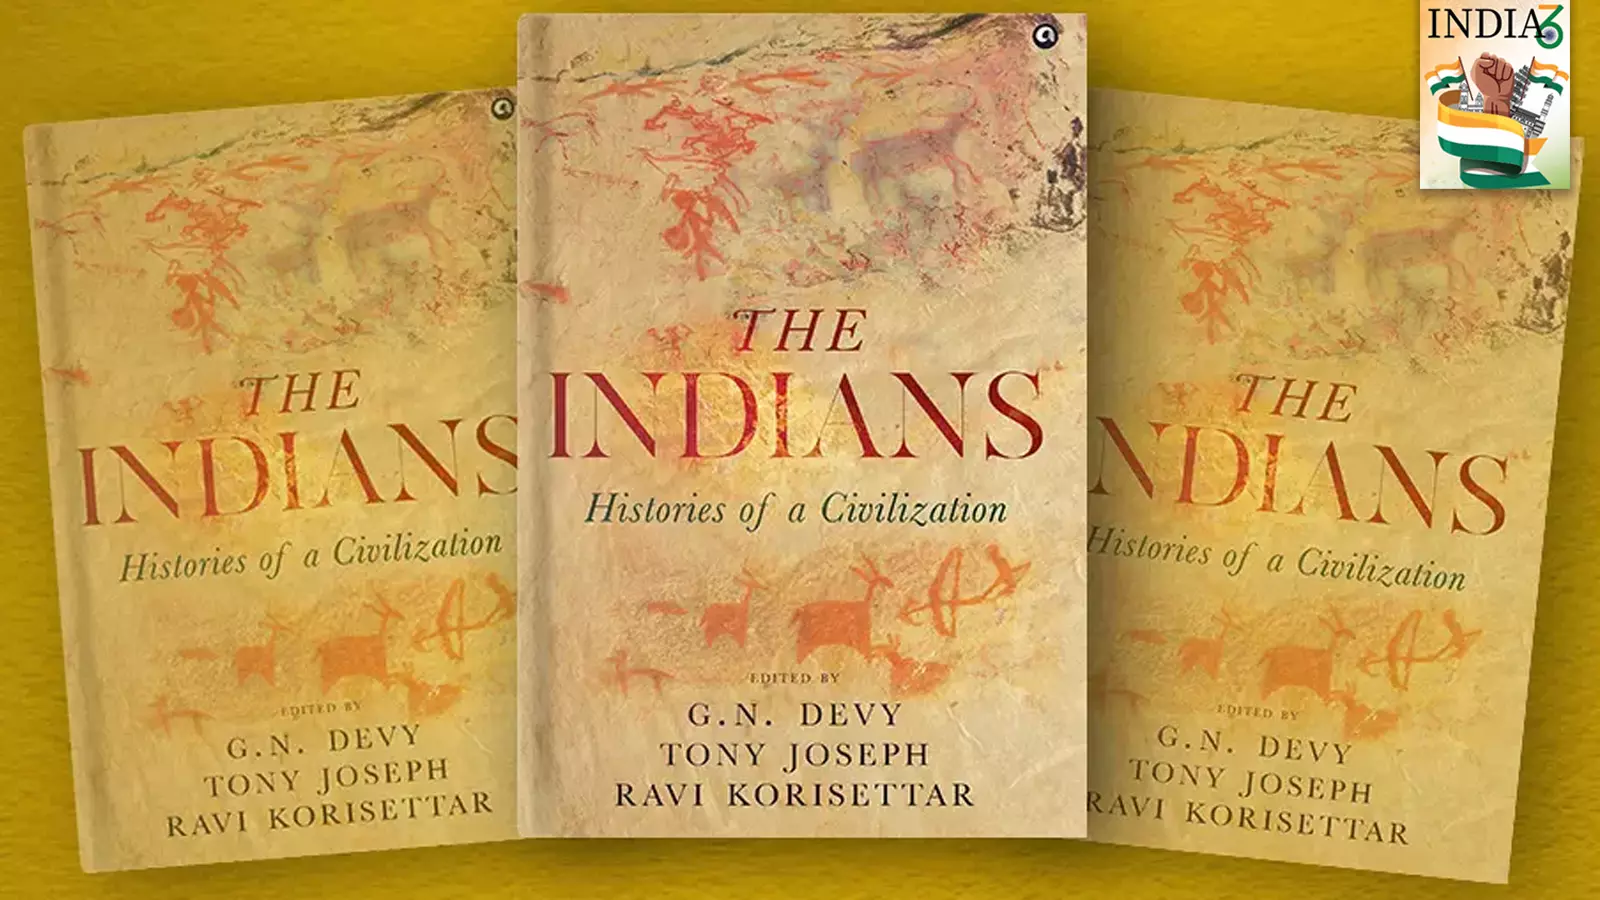 The Indians: Histories of a Civilization review: Book of essays traces the journey of freedom